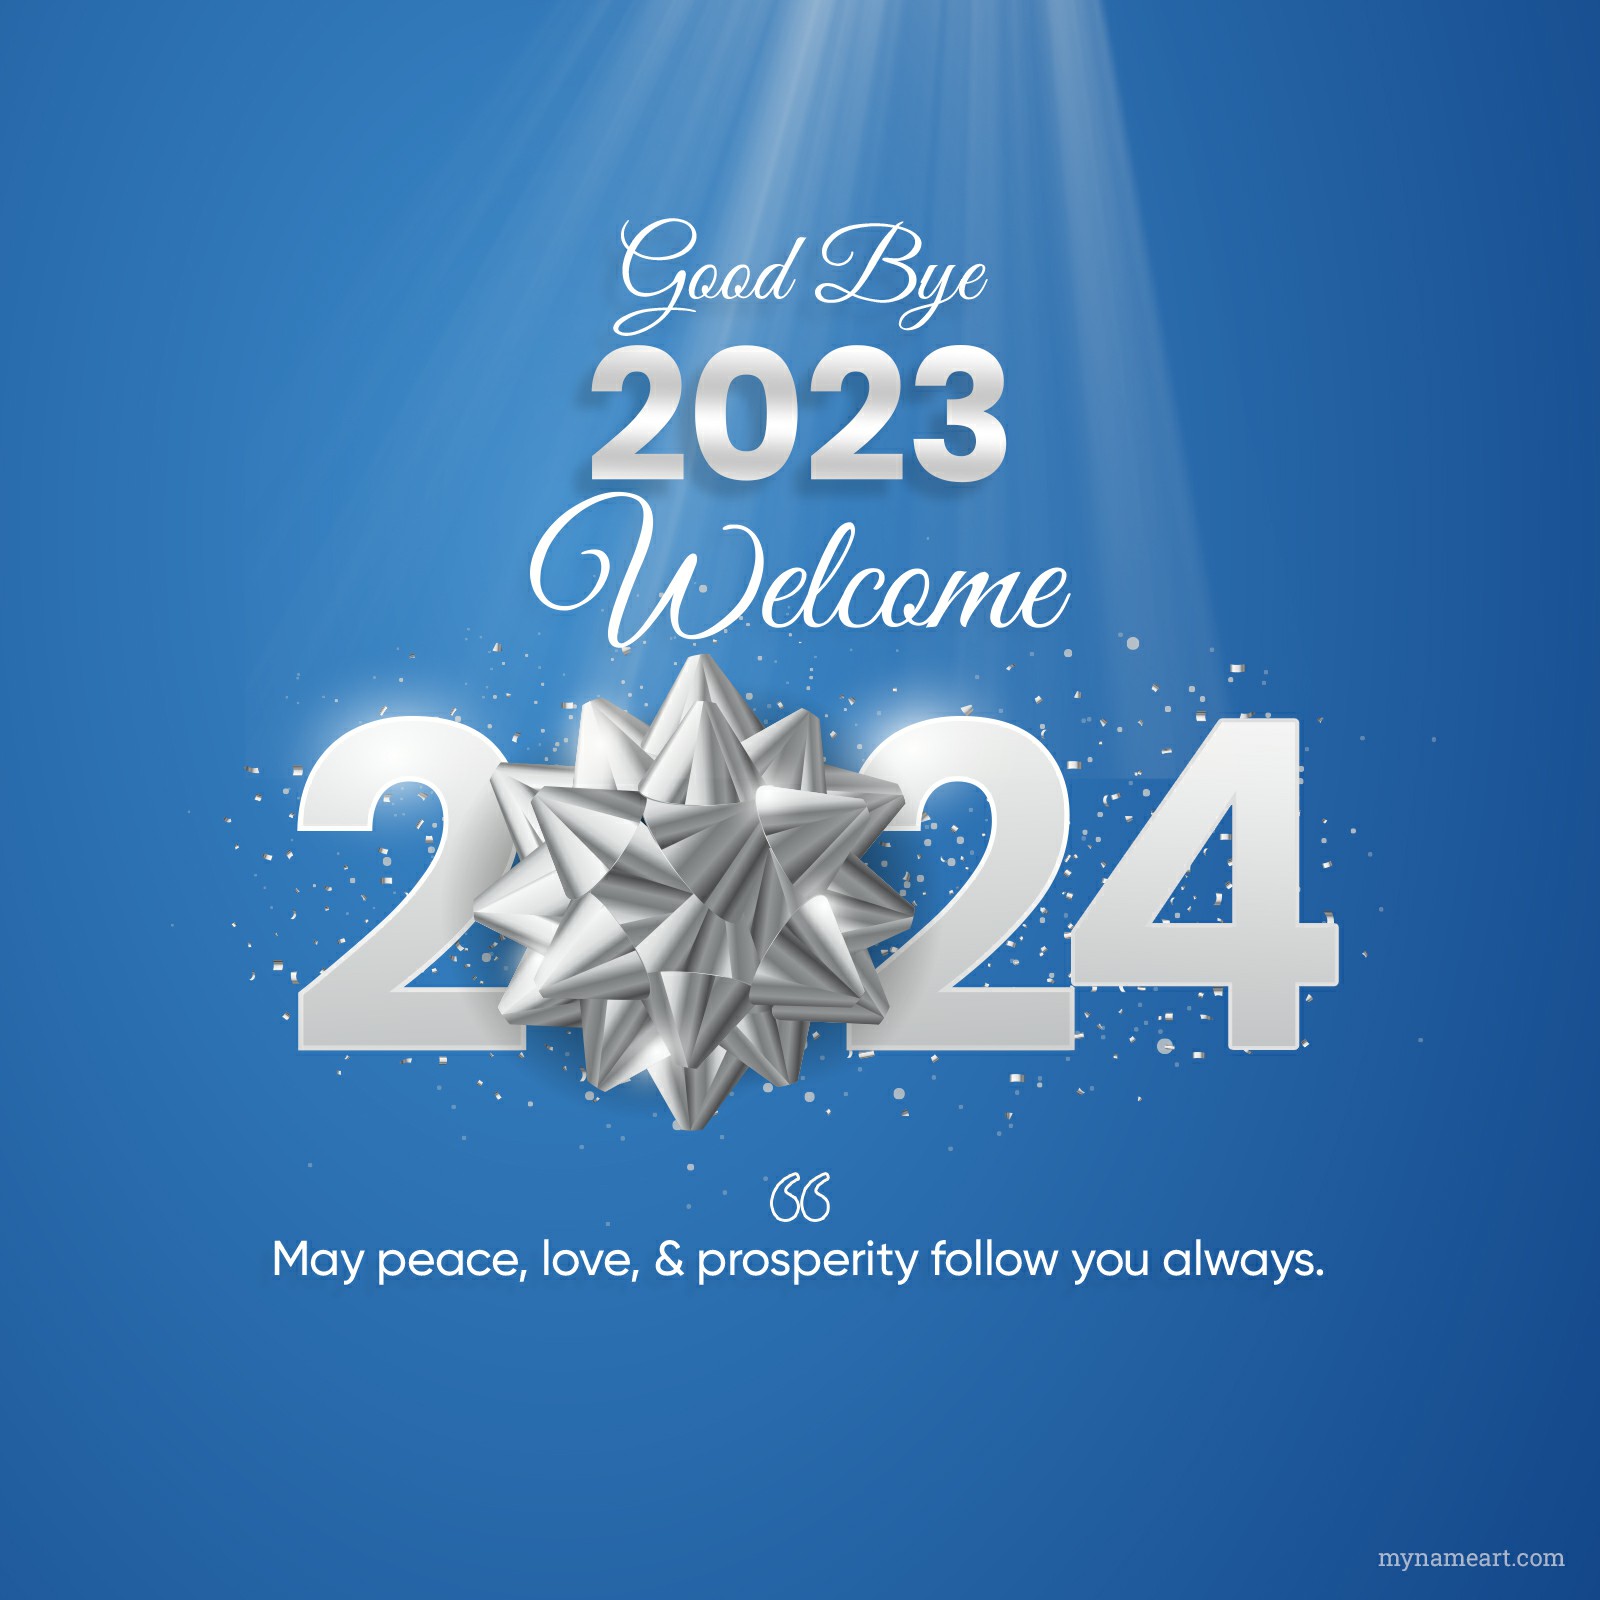 Goodbye 2023 2024 Images, Quotes, Message And Photo Collections